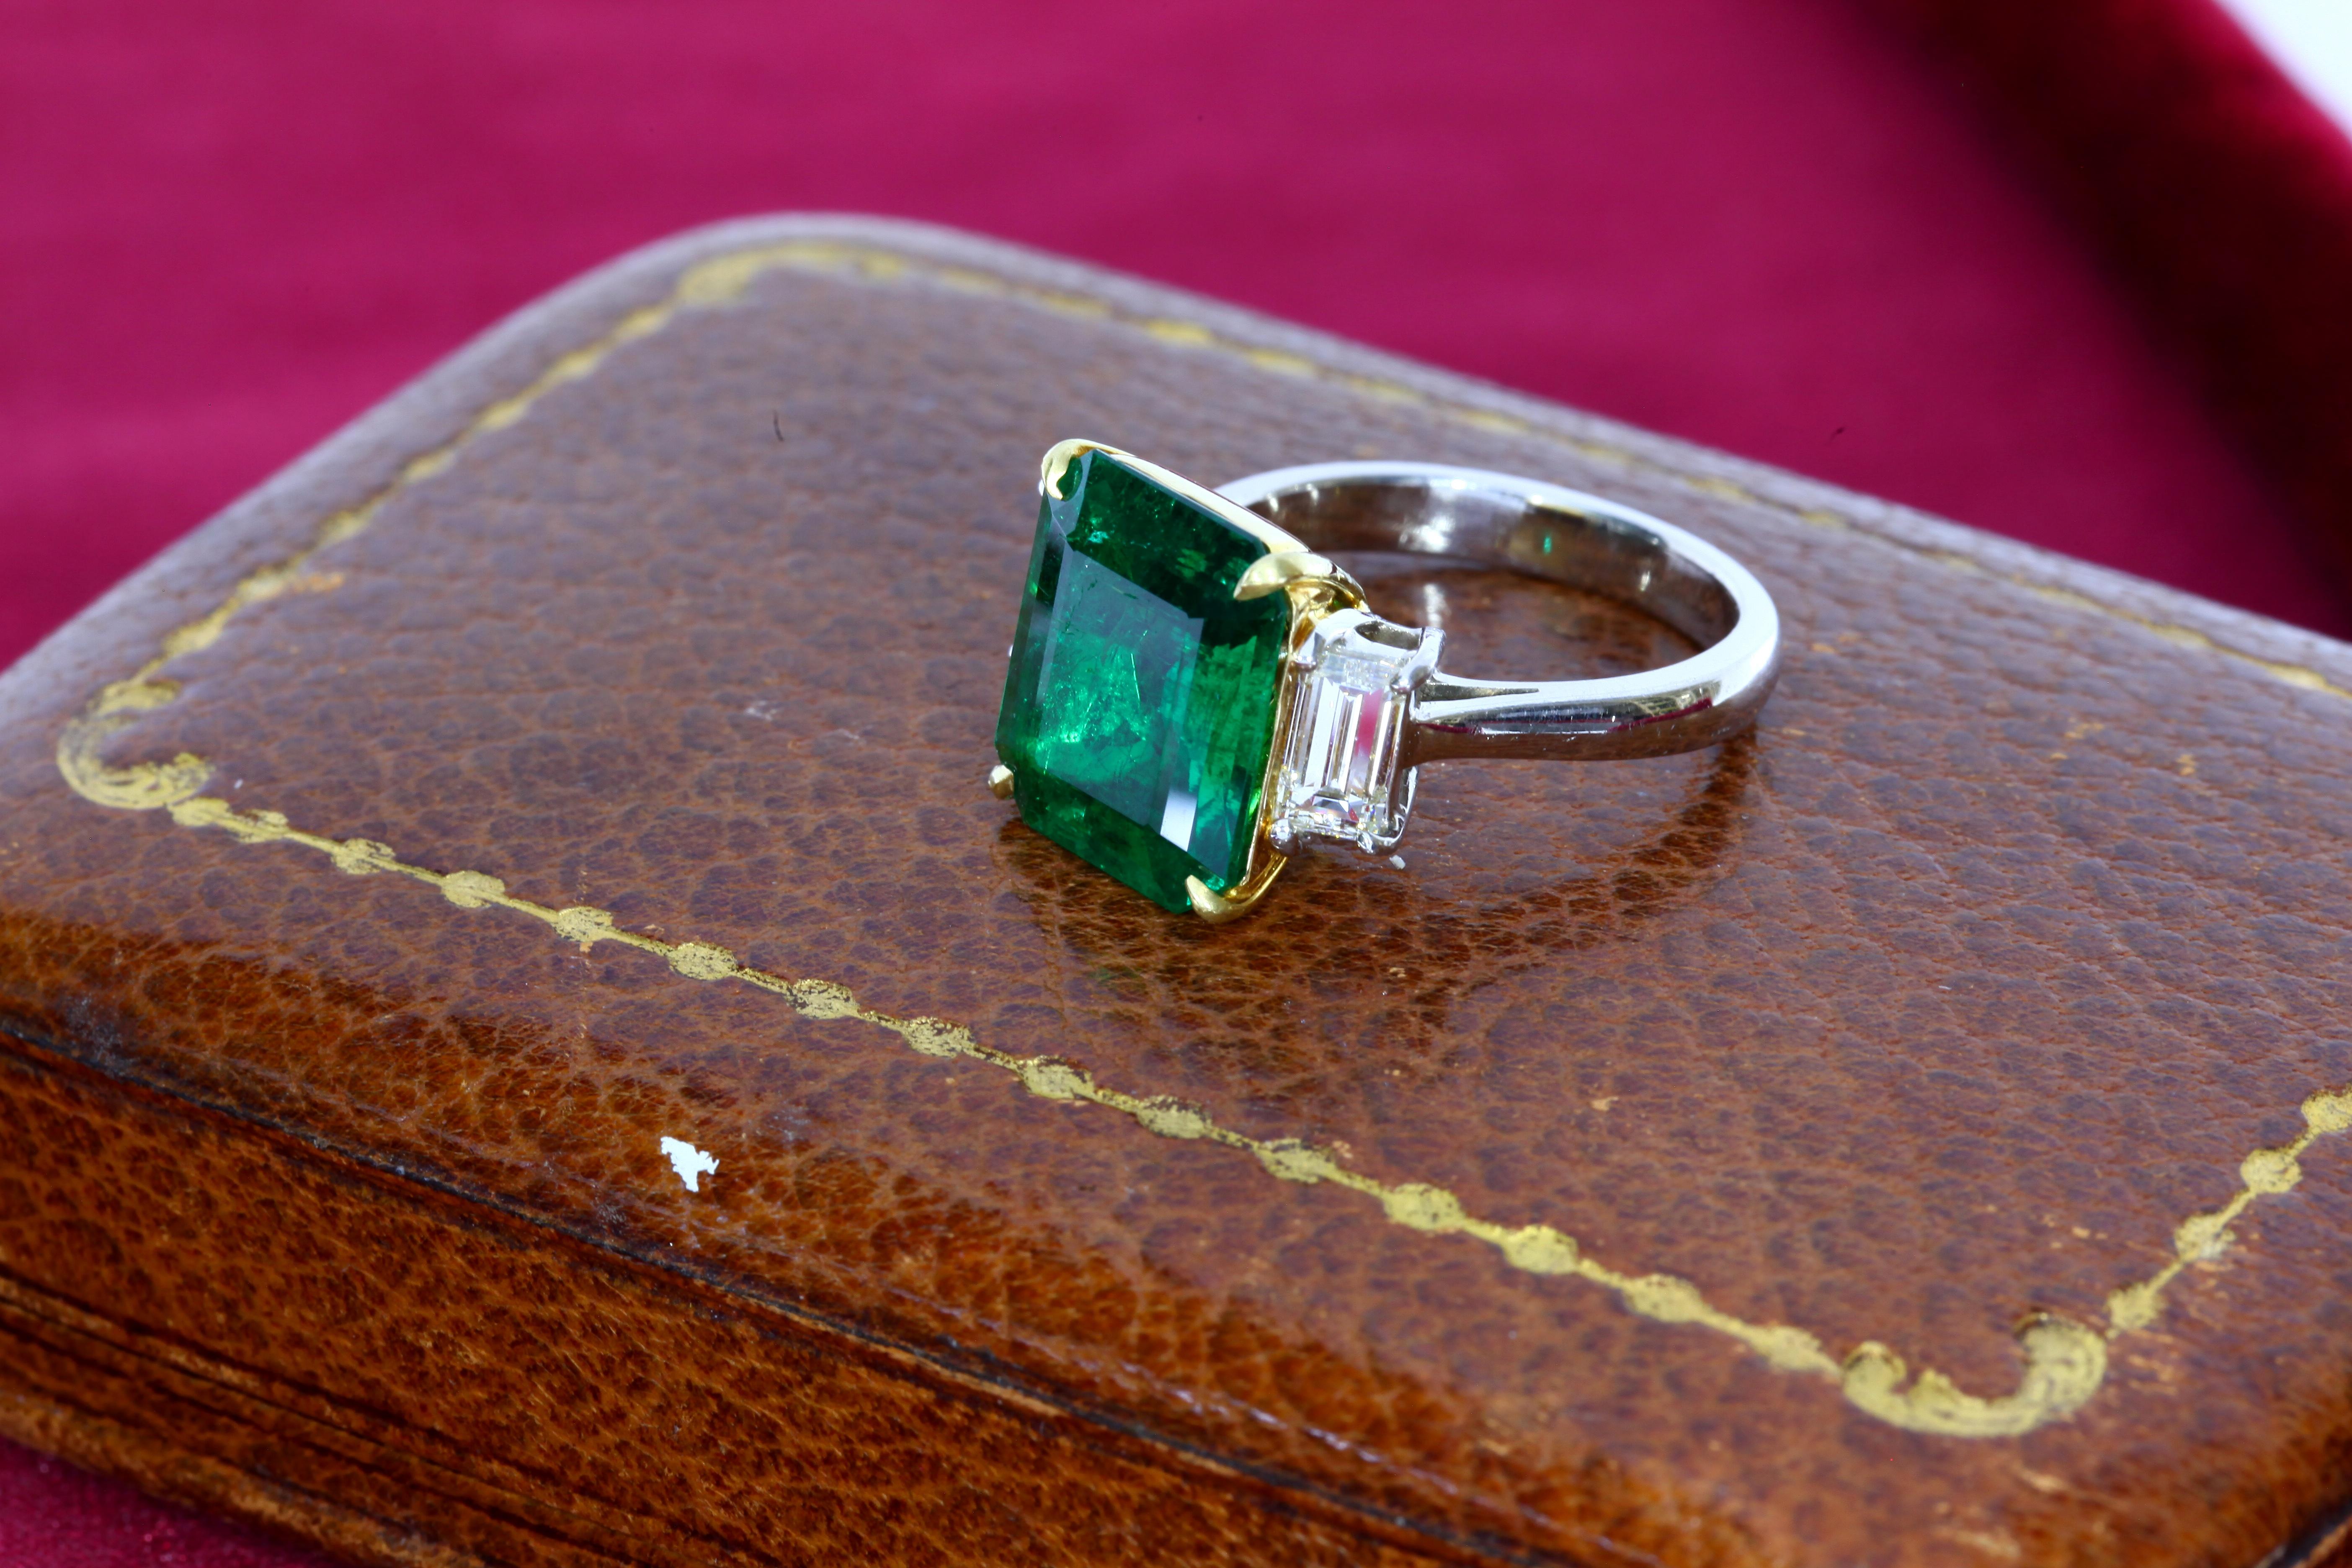 This 5.11 carat Colombian emerald with minor oil enhancement has a green of medium strong saturation according to the SSEF certificate. The stone measures 13.58 x 11.34 x 4.77mm making it appear to be significantly larger than 5.11 carats from the